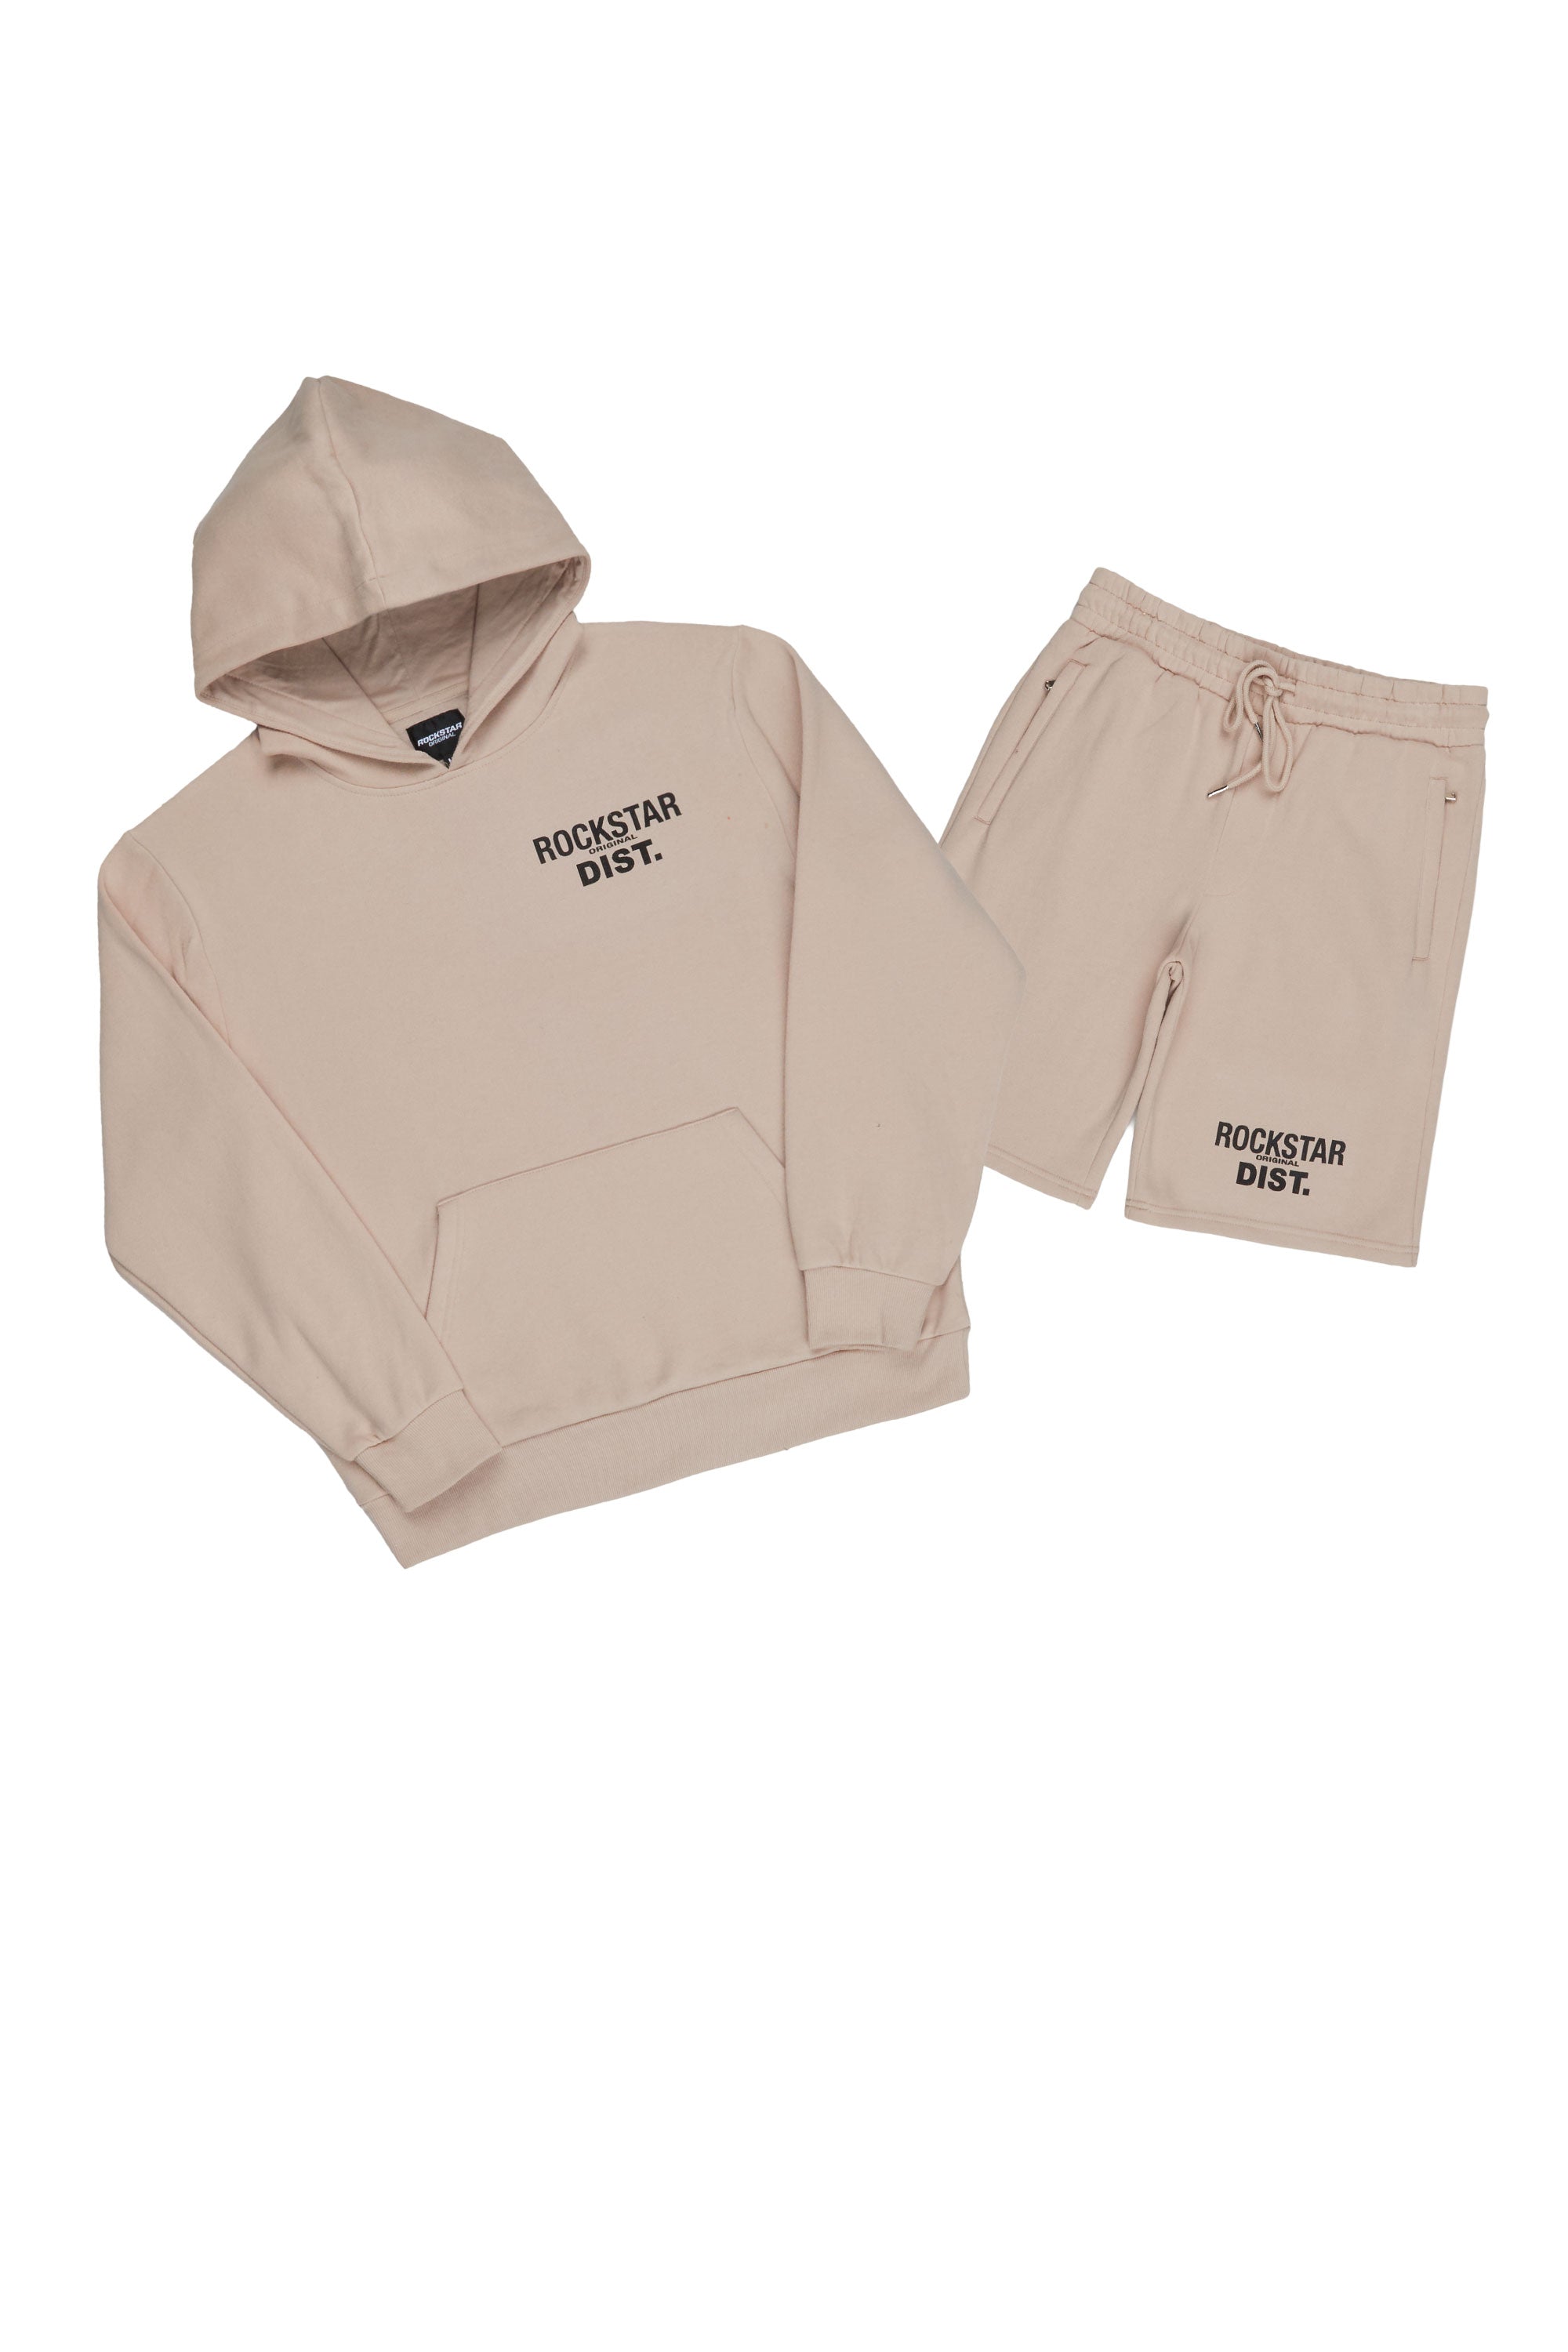 Nelly Taupe Hoodie Short Set